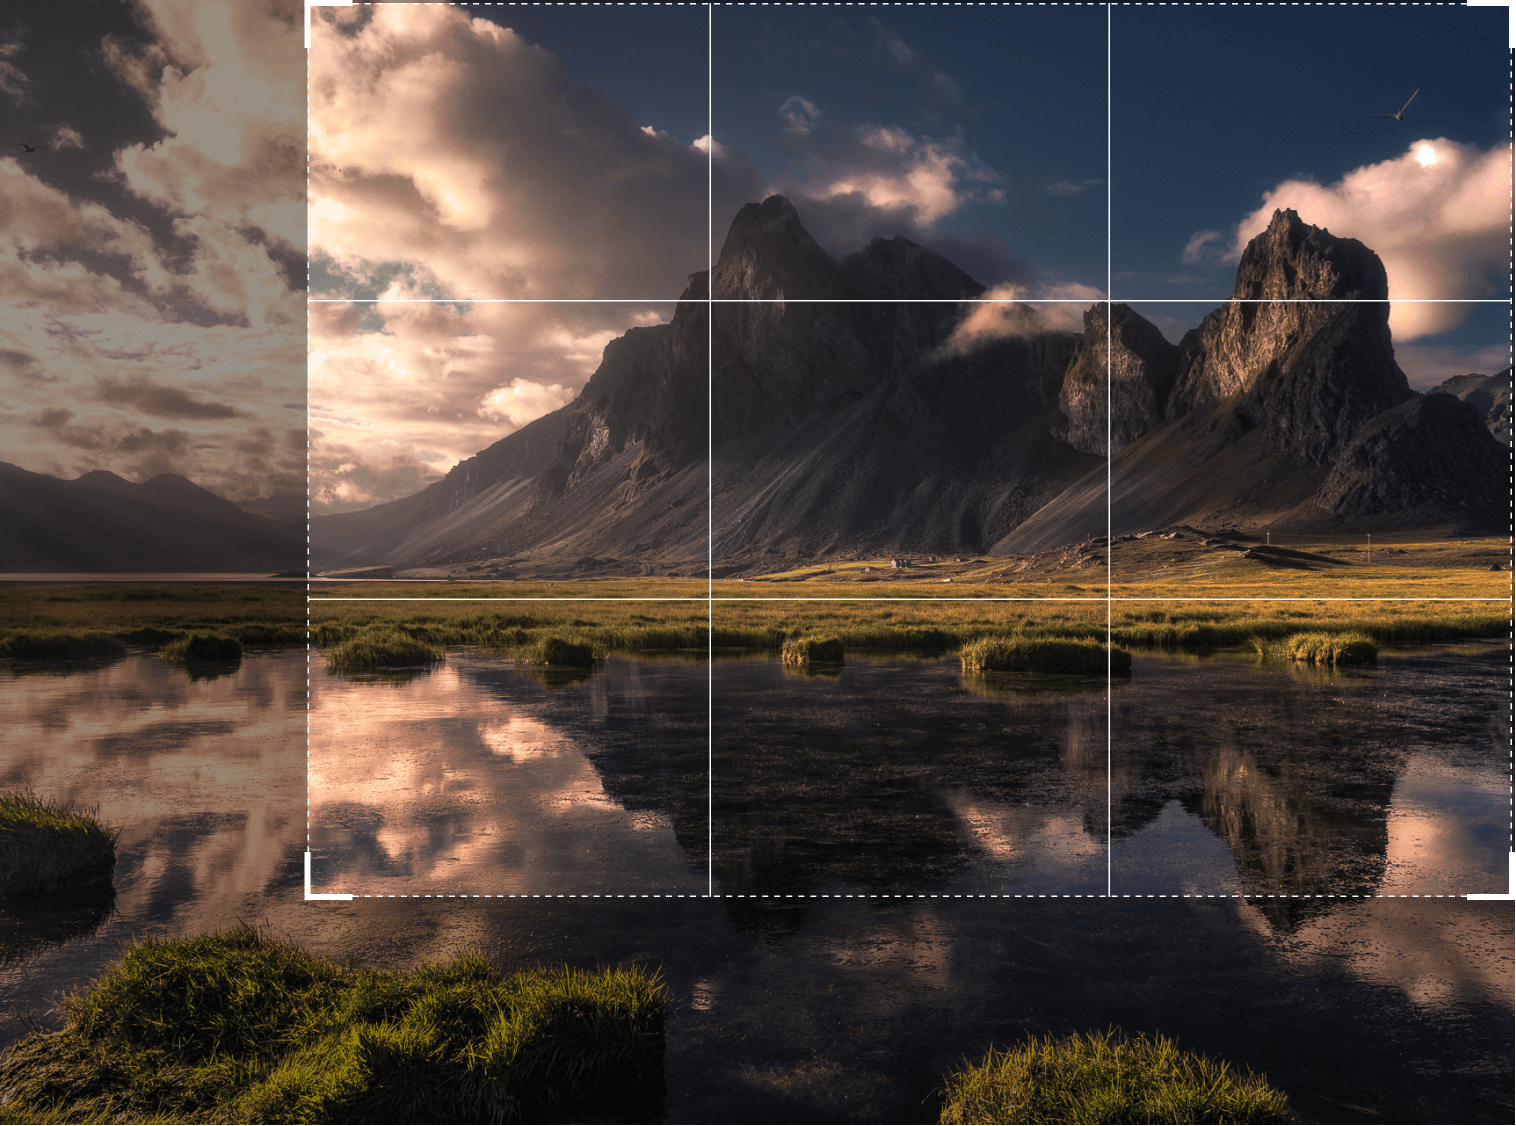 What’s new in Luminar Neo compared to Luminar 4?